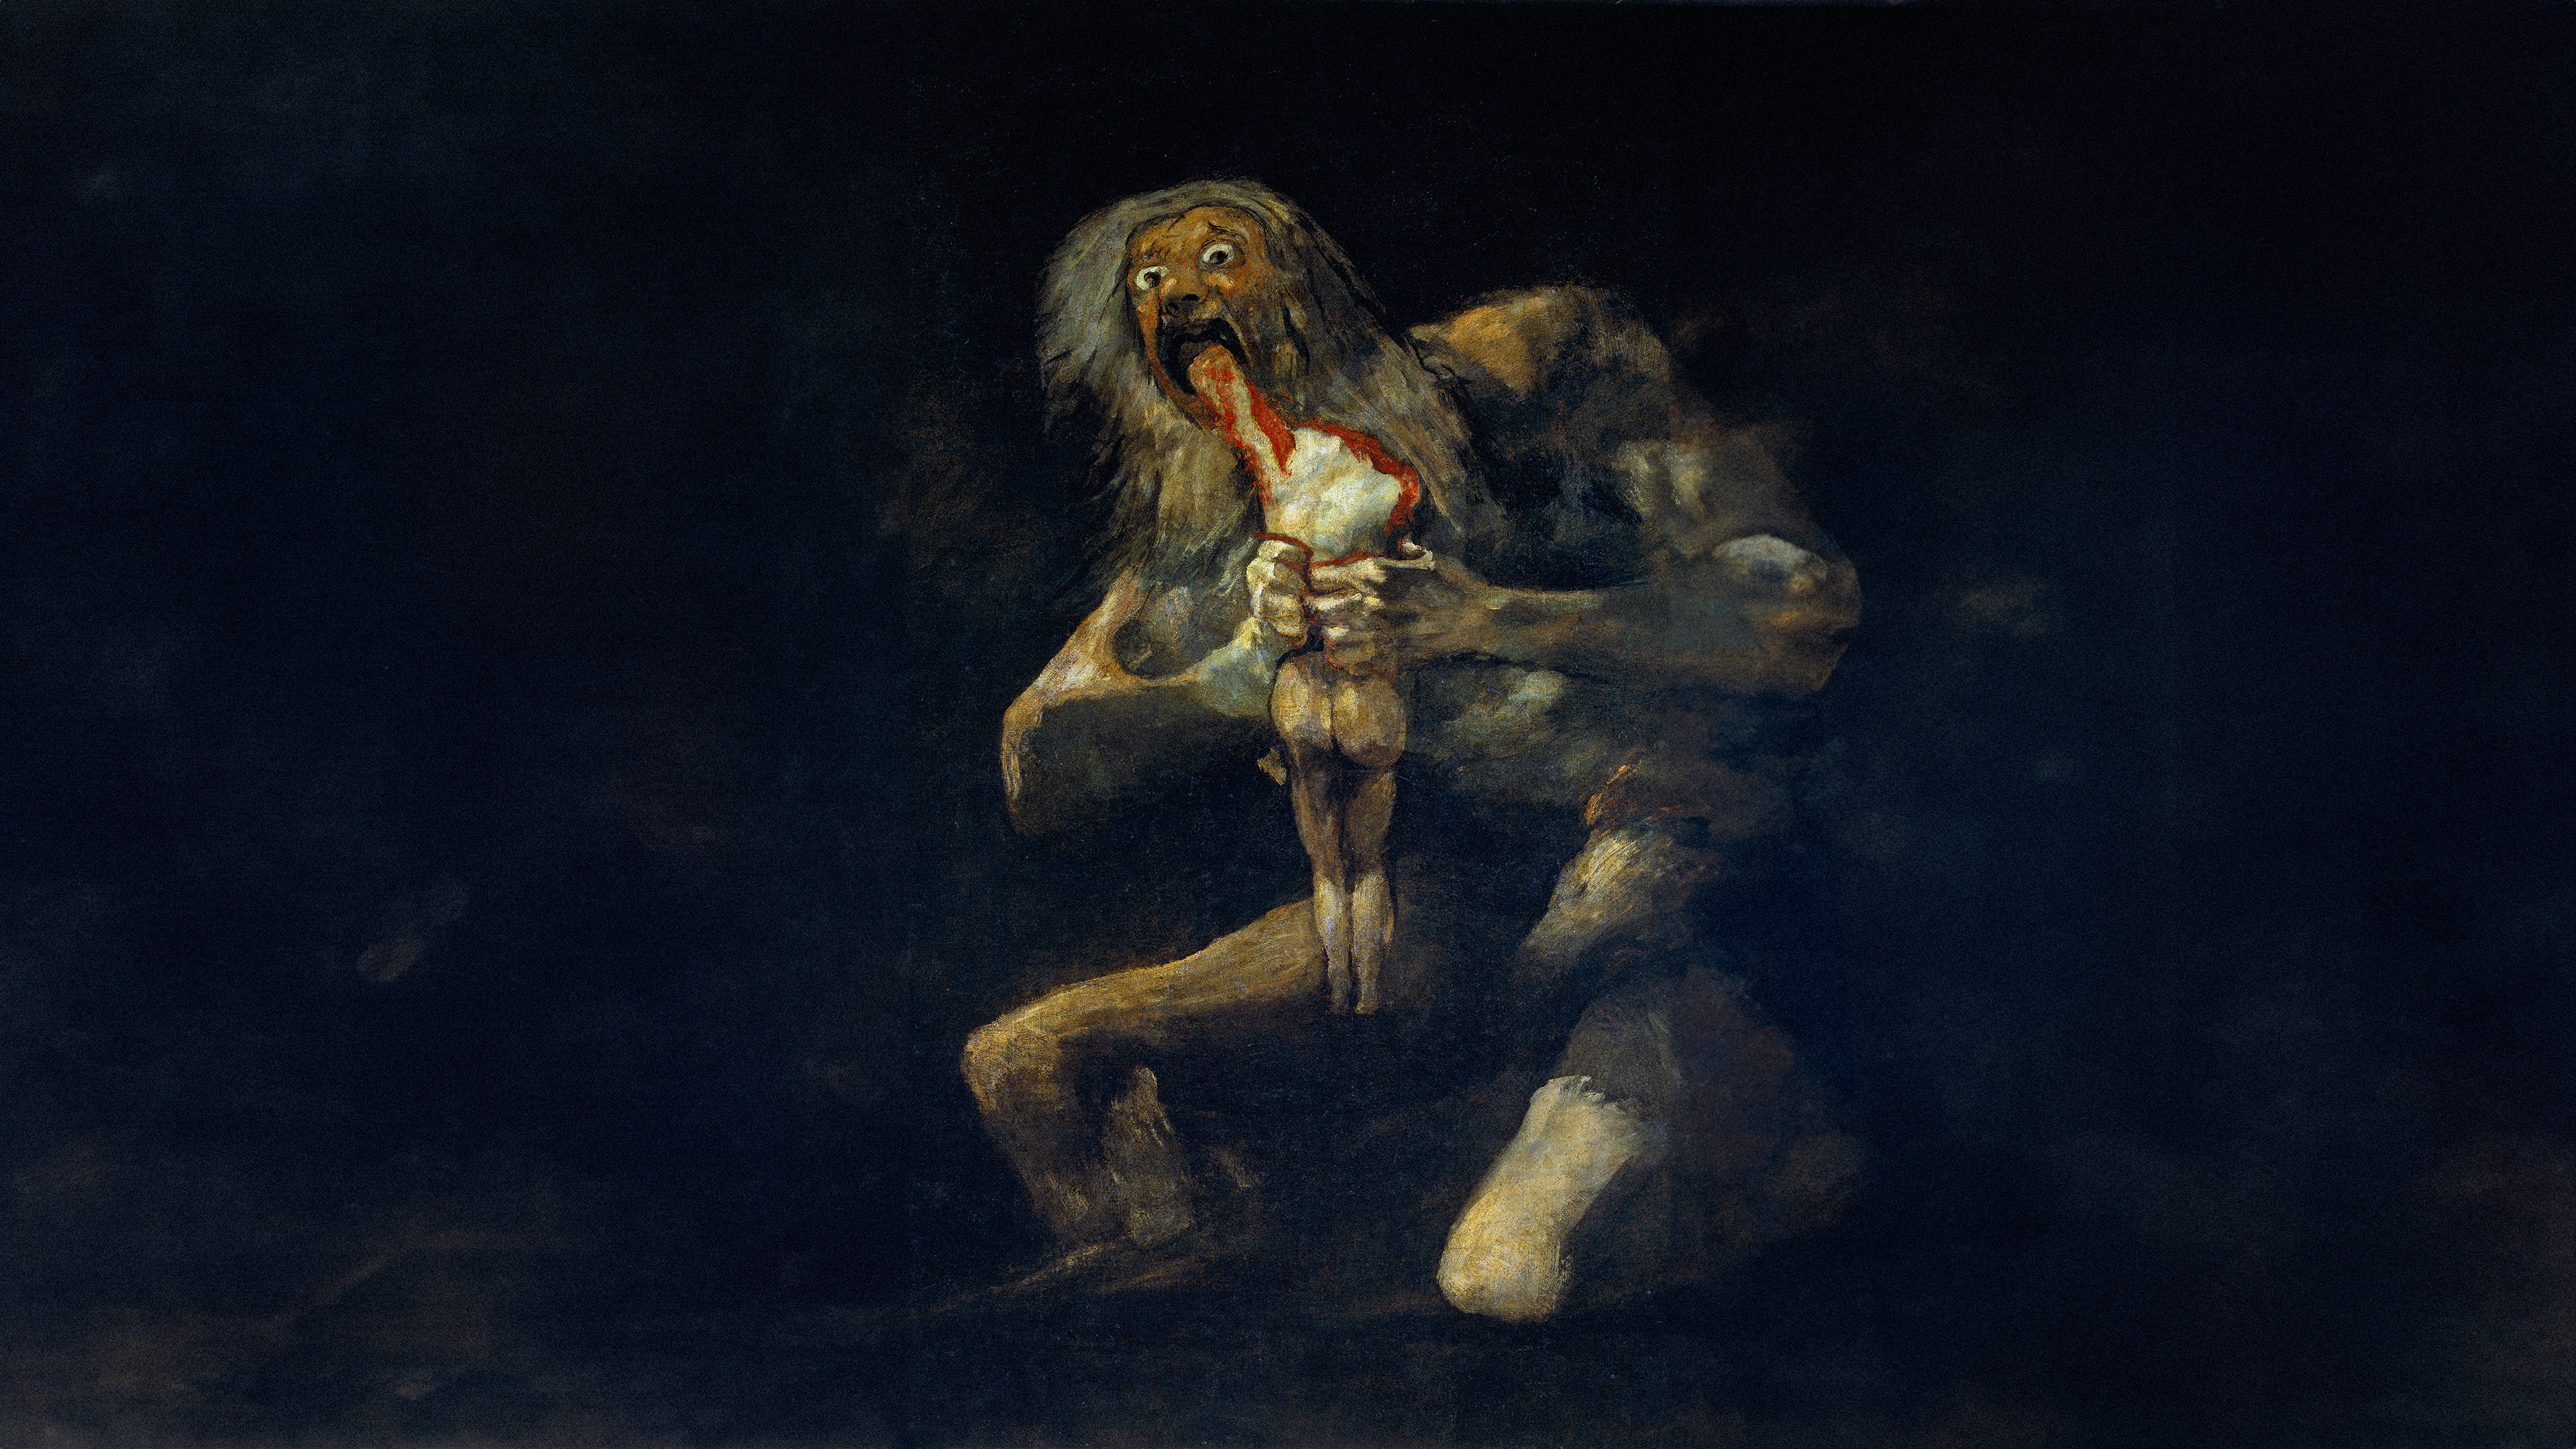 General 3840x2160 Saturn Devouring His Son painting Francisco Goya artwork gore creature minimalism simple background muscles